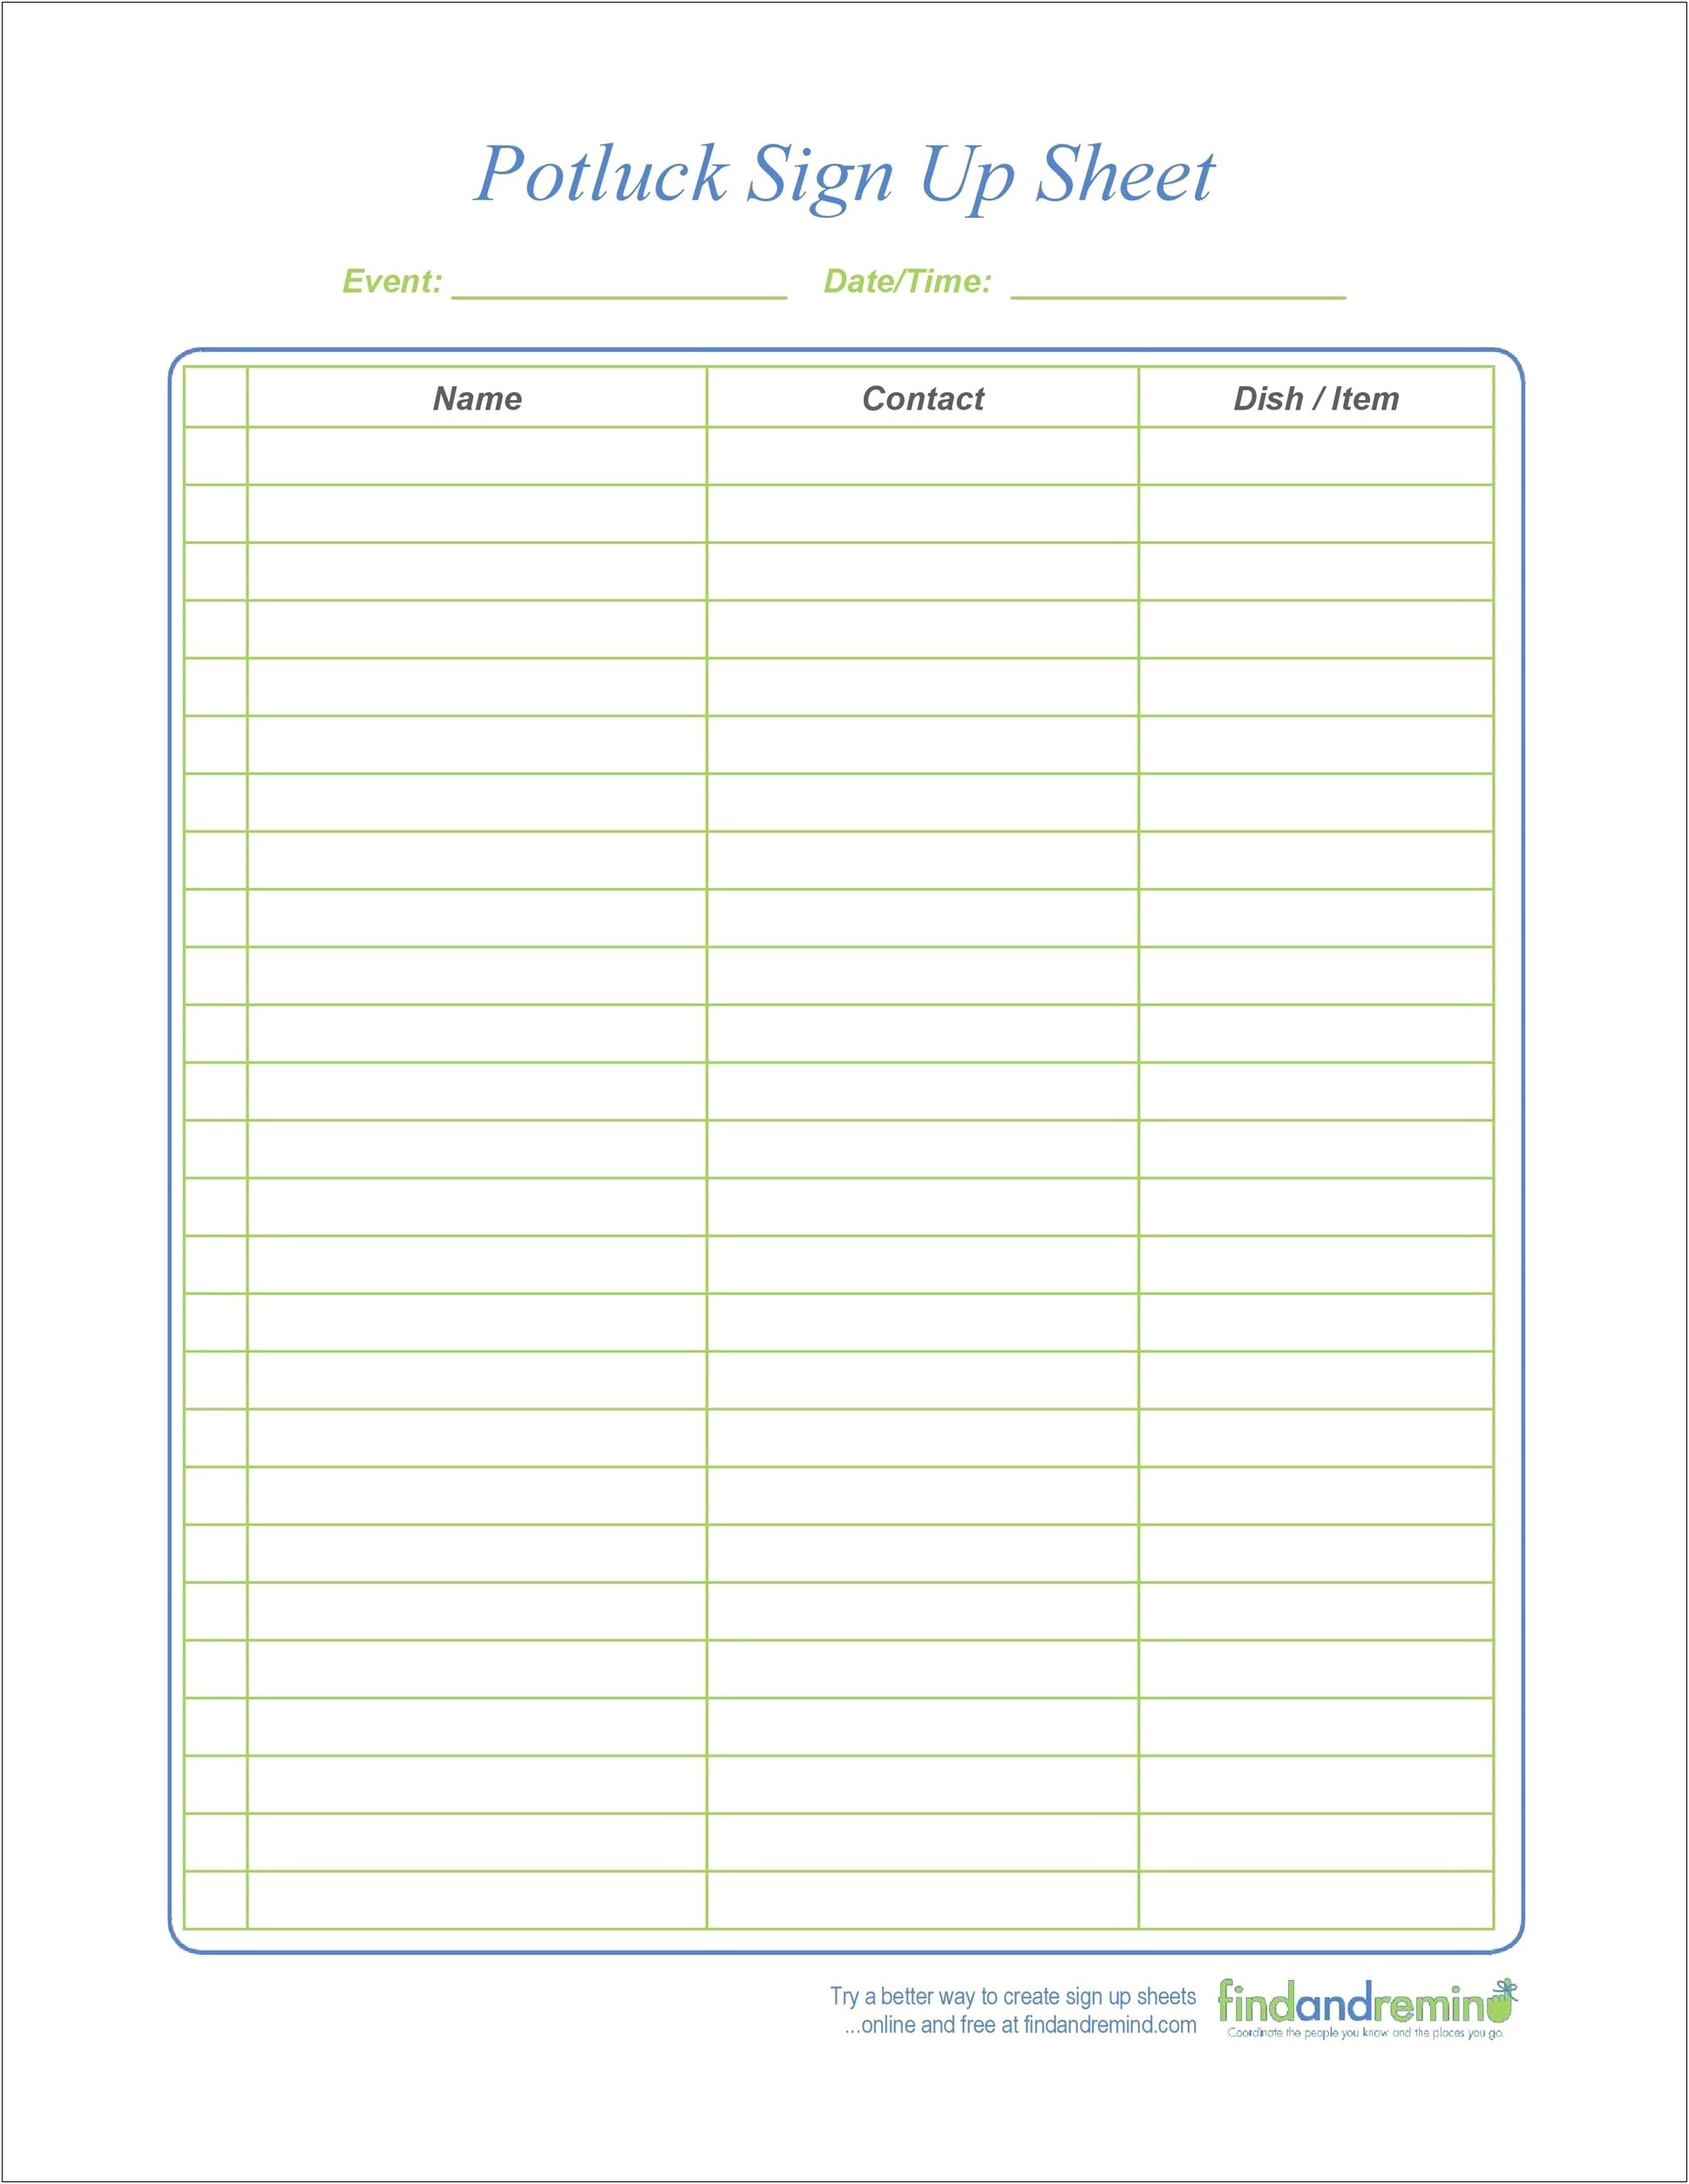 free-printable-sign-up-sheet-for-potluck-printable-form-templates